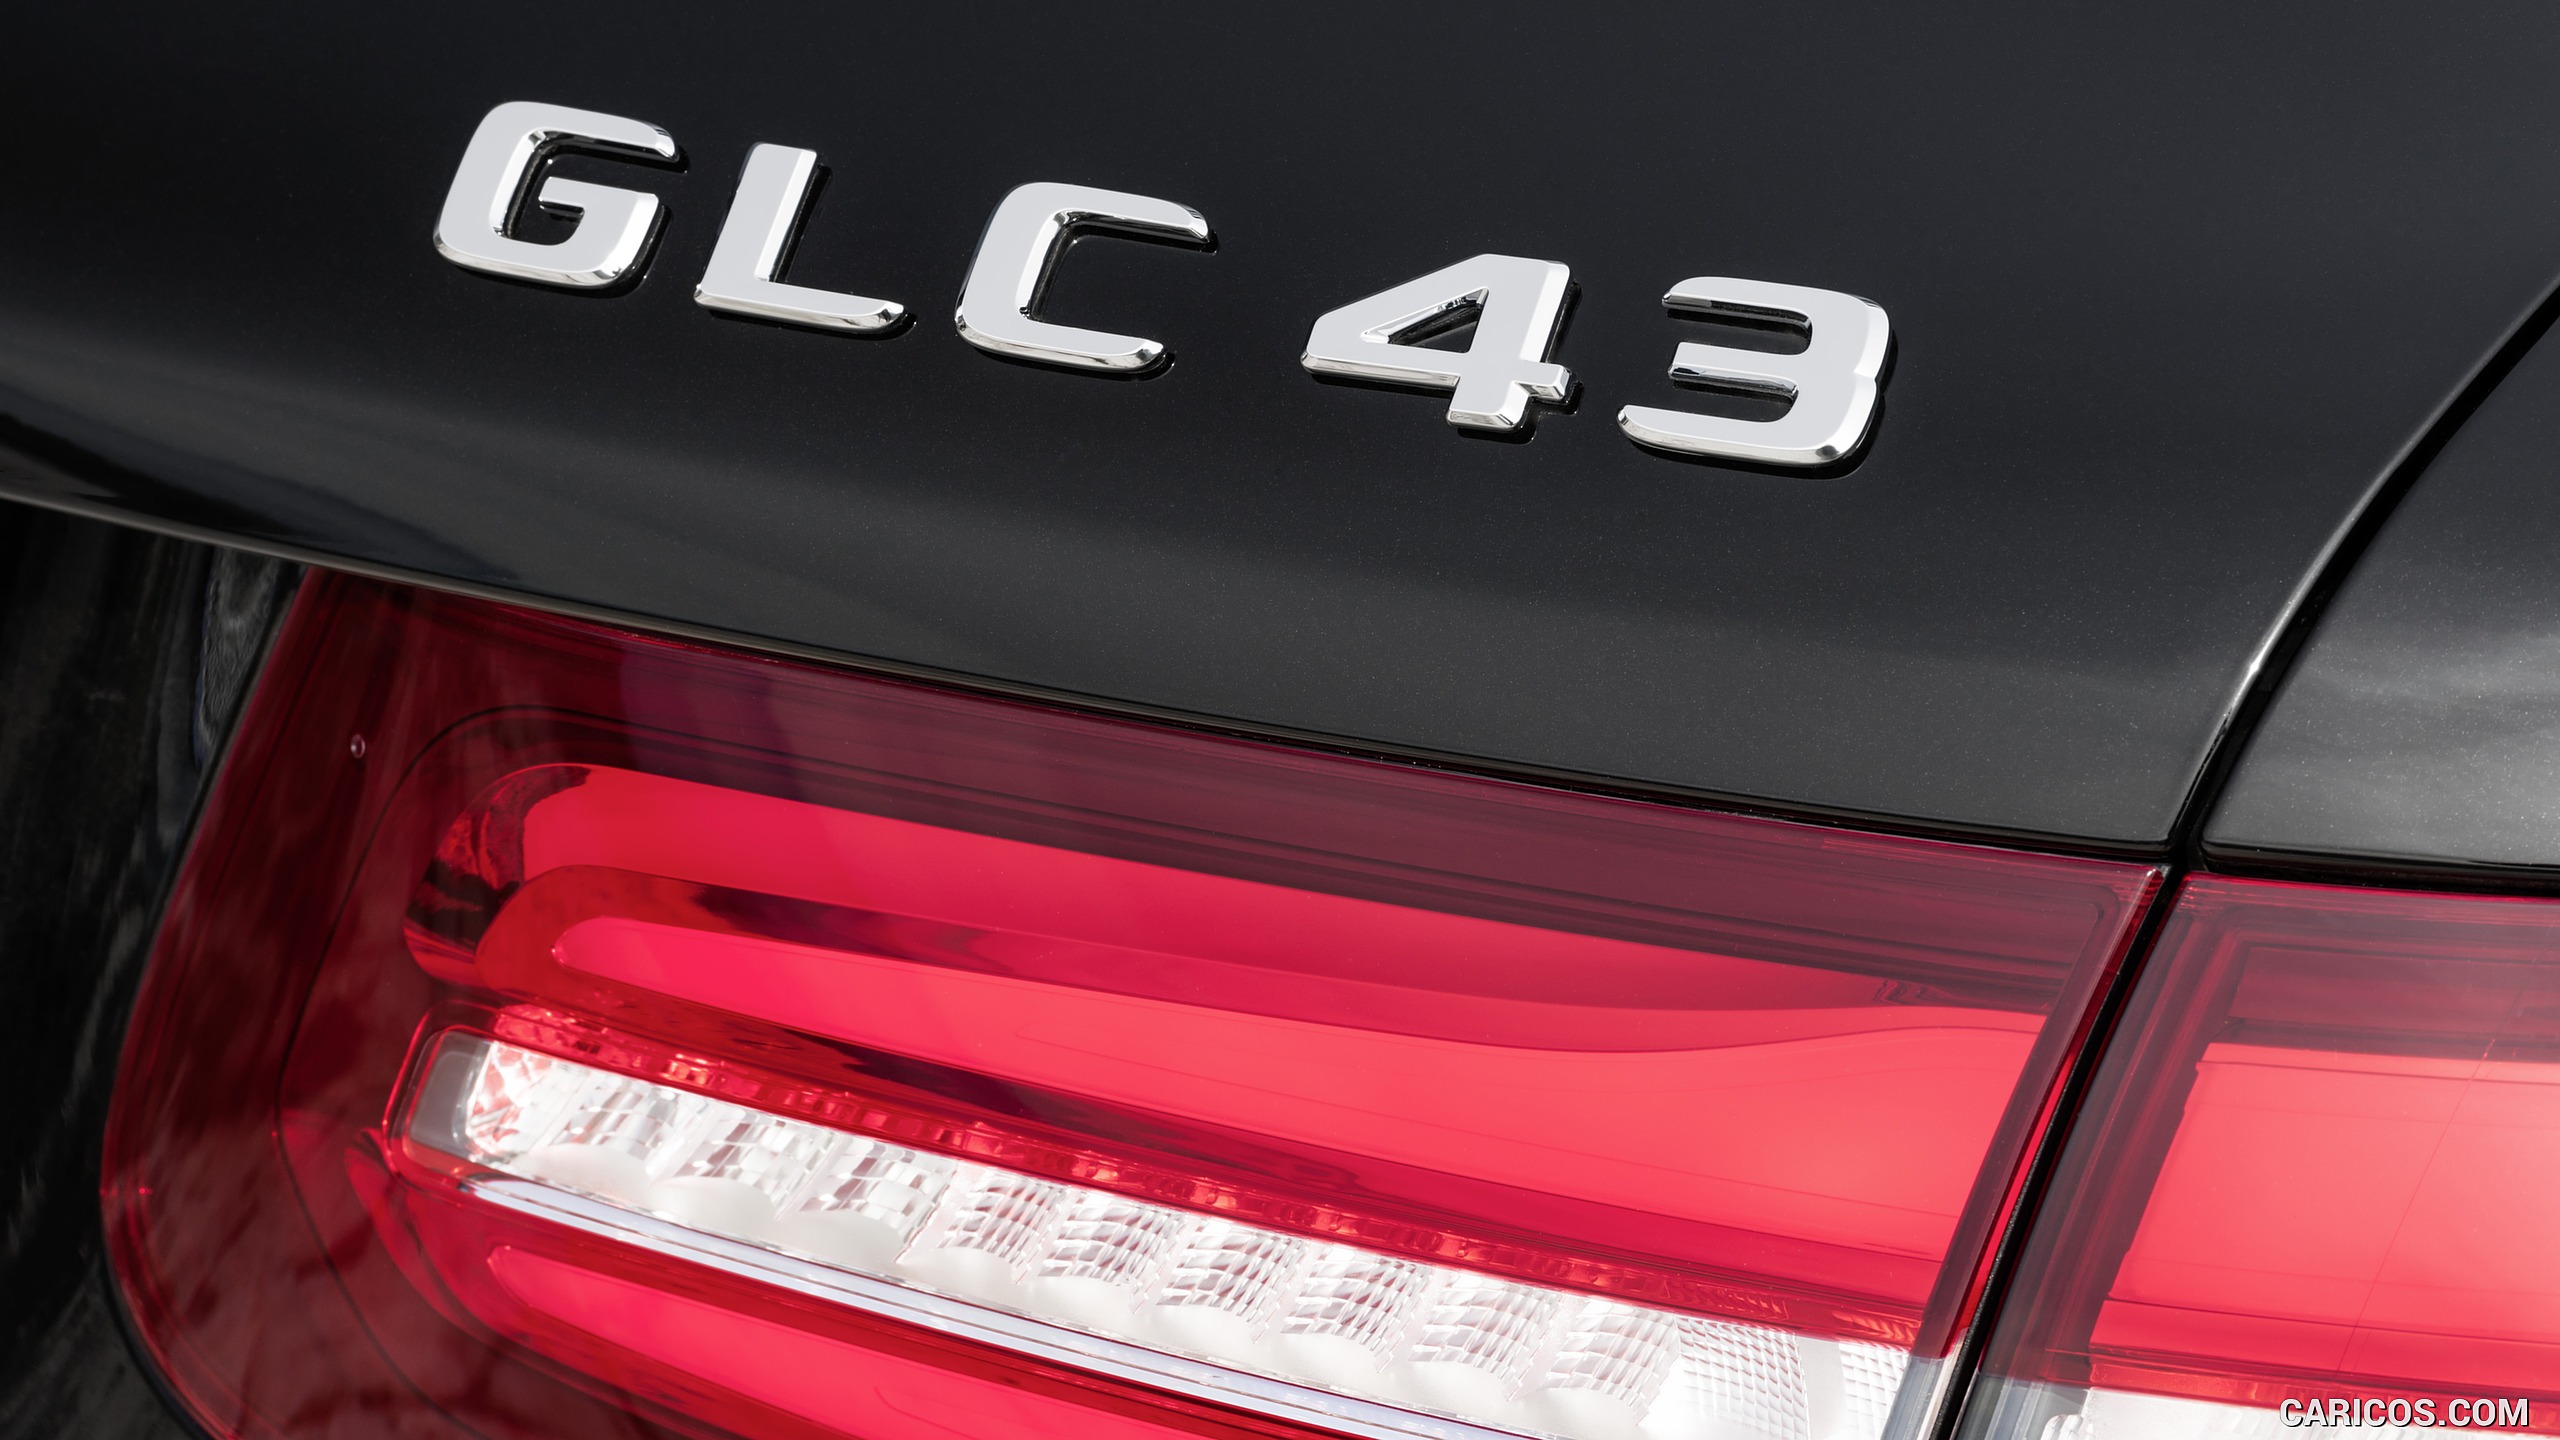 2017 Mercedes-AMG GLC 43 4MATIC (Chassis: X253, Color: Obsidian Black) - Tail Light, #25 of 108